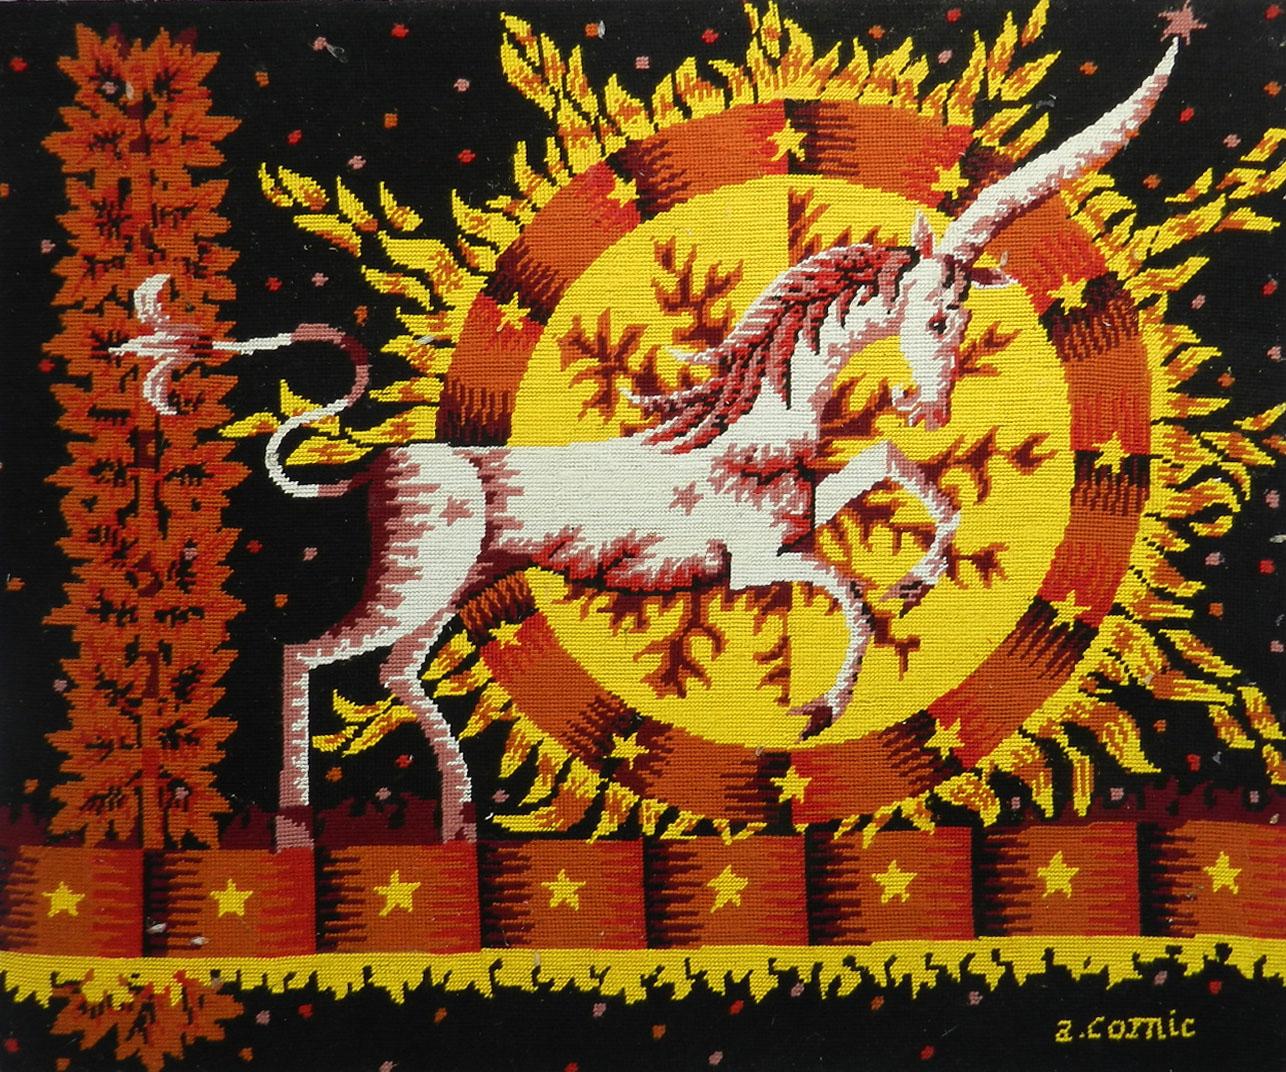 Midcentury tapestry French hand stitched needlepoint designed by Alain Cornic
in the tradition of Jean Lurcat and Picart Le Doux
Alain Cornic is a painter illustrator known for his highly colorful works representing life in the 1960s and 1970s
The